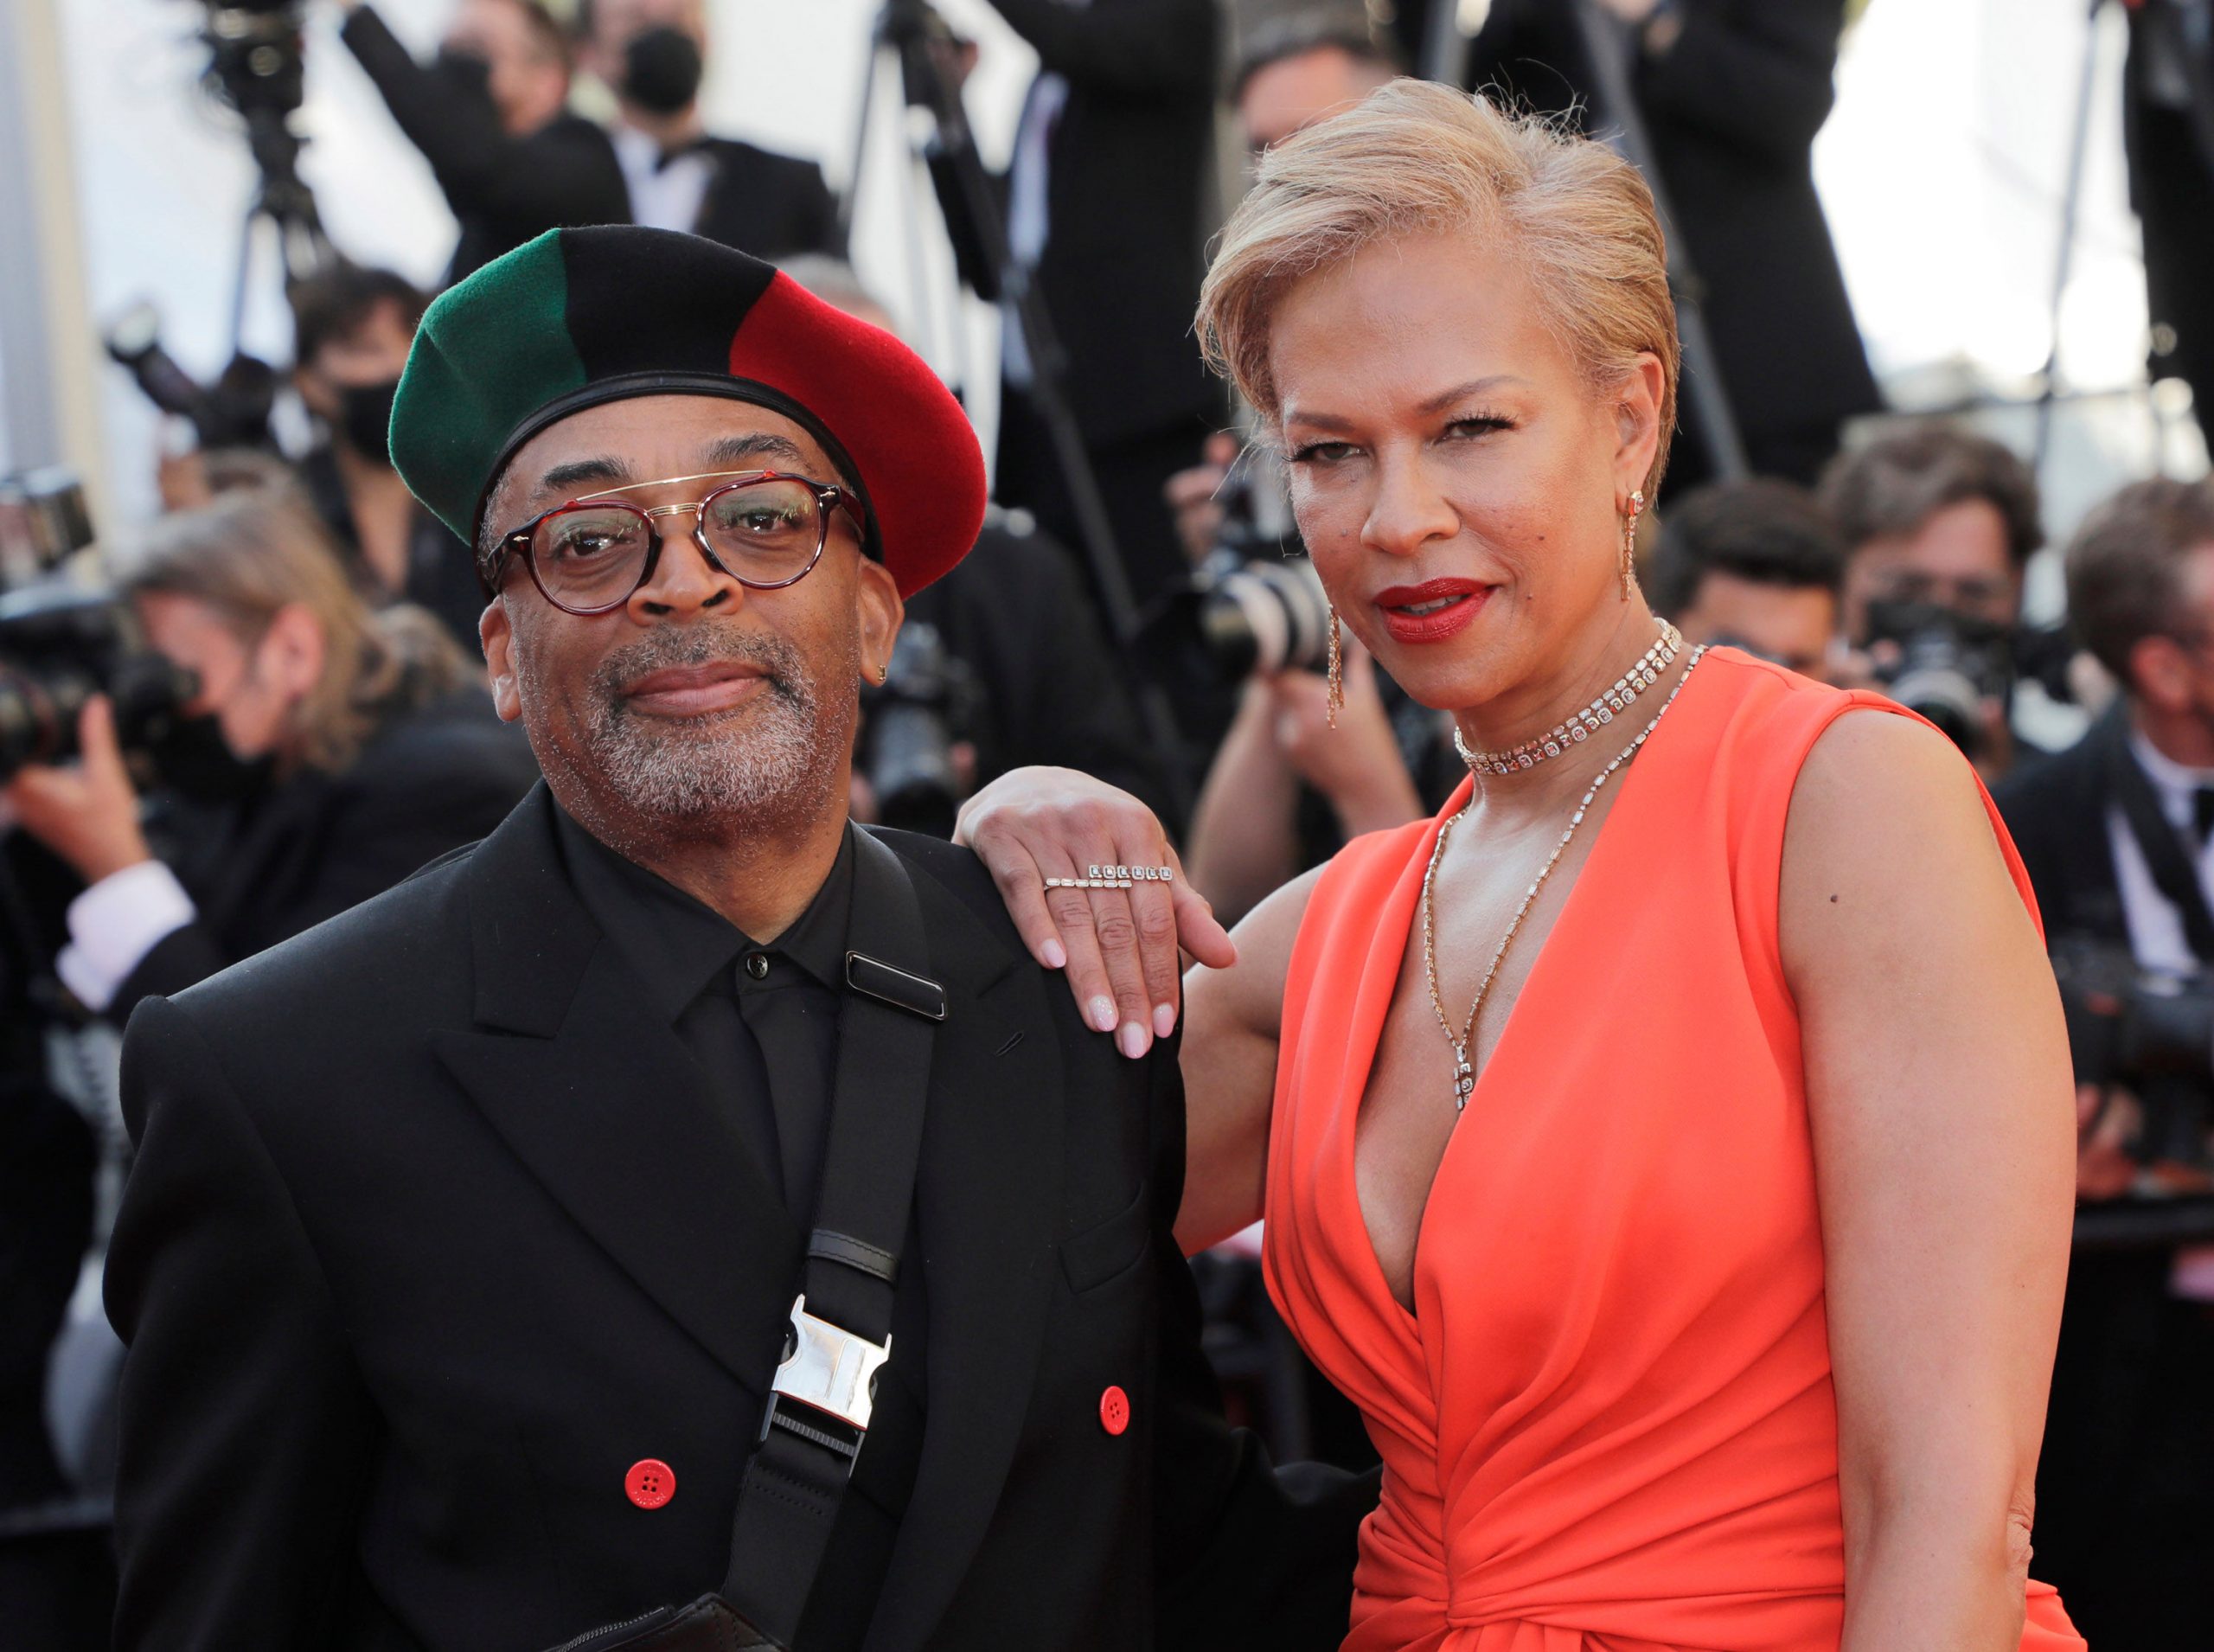 Director Spike Lee cashes in on Cannes autographed items sale on his website